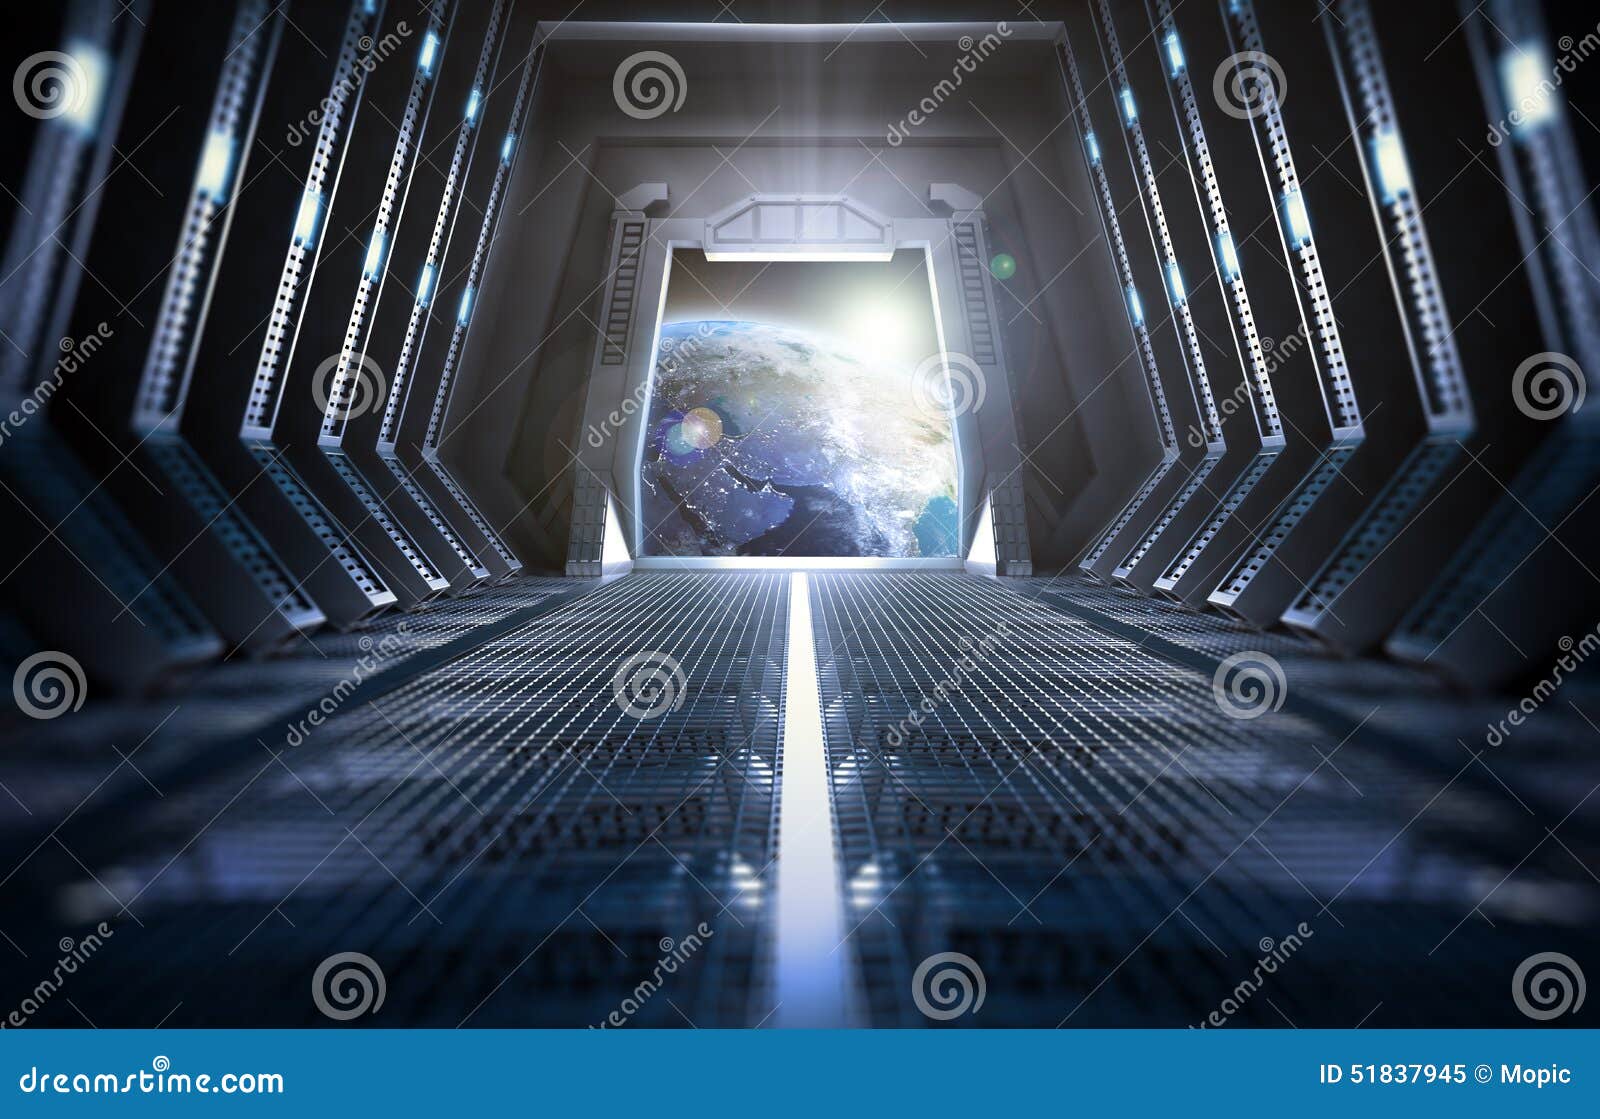 earth seen from inside a space station